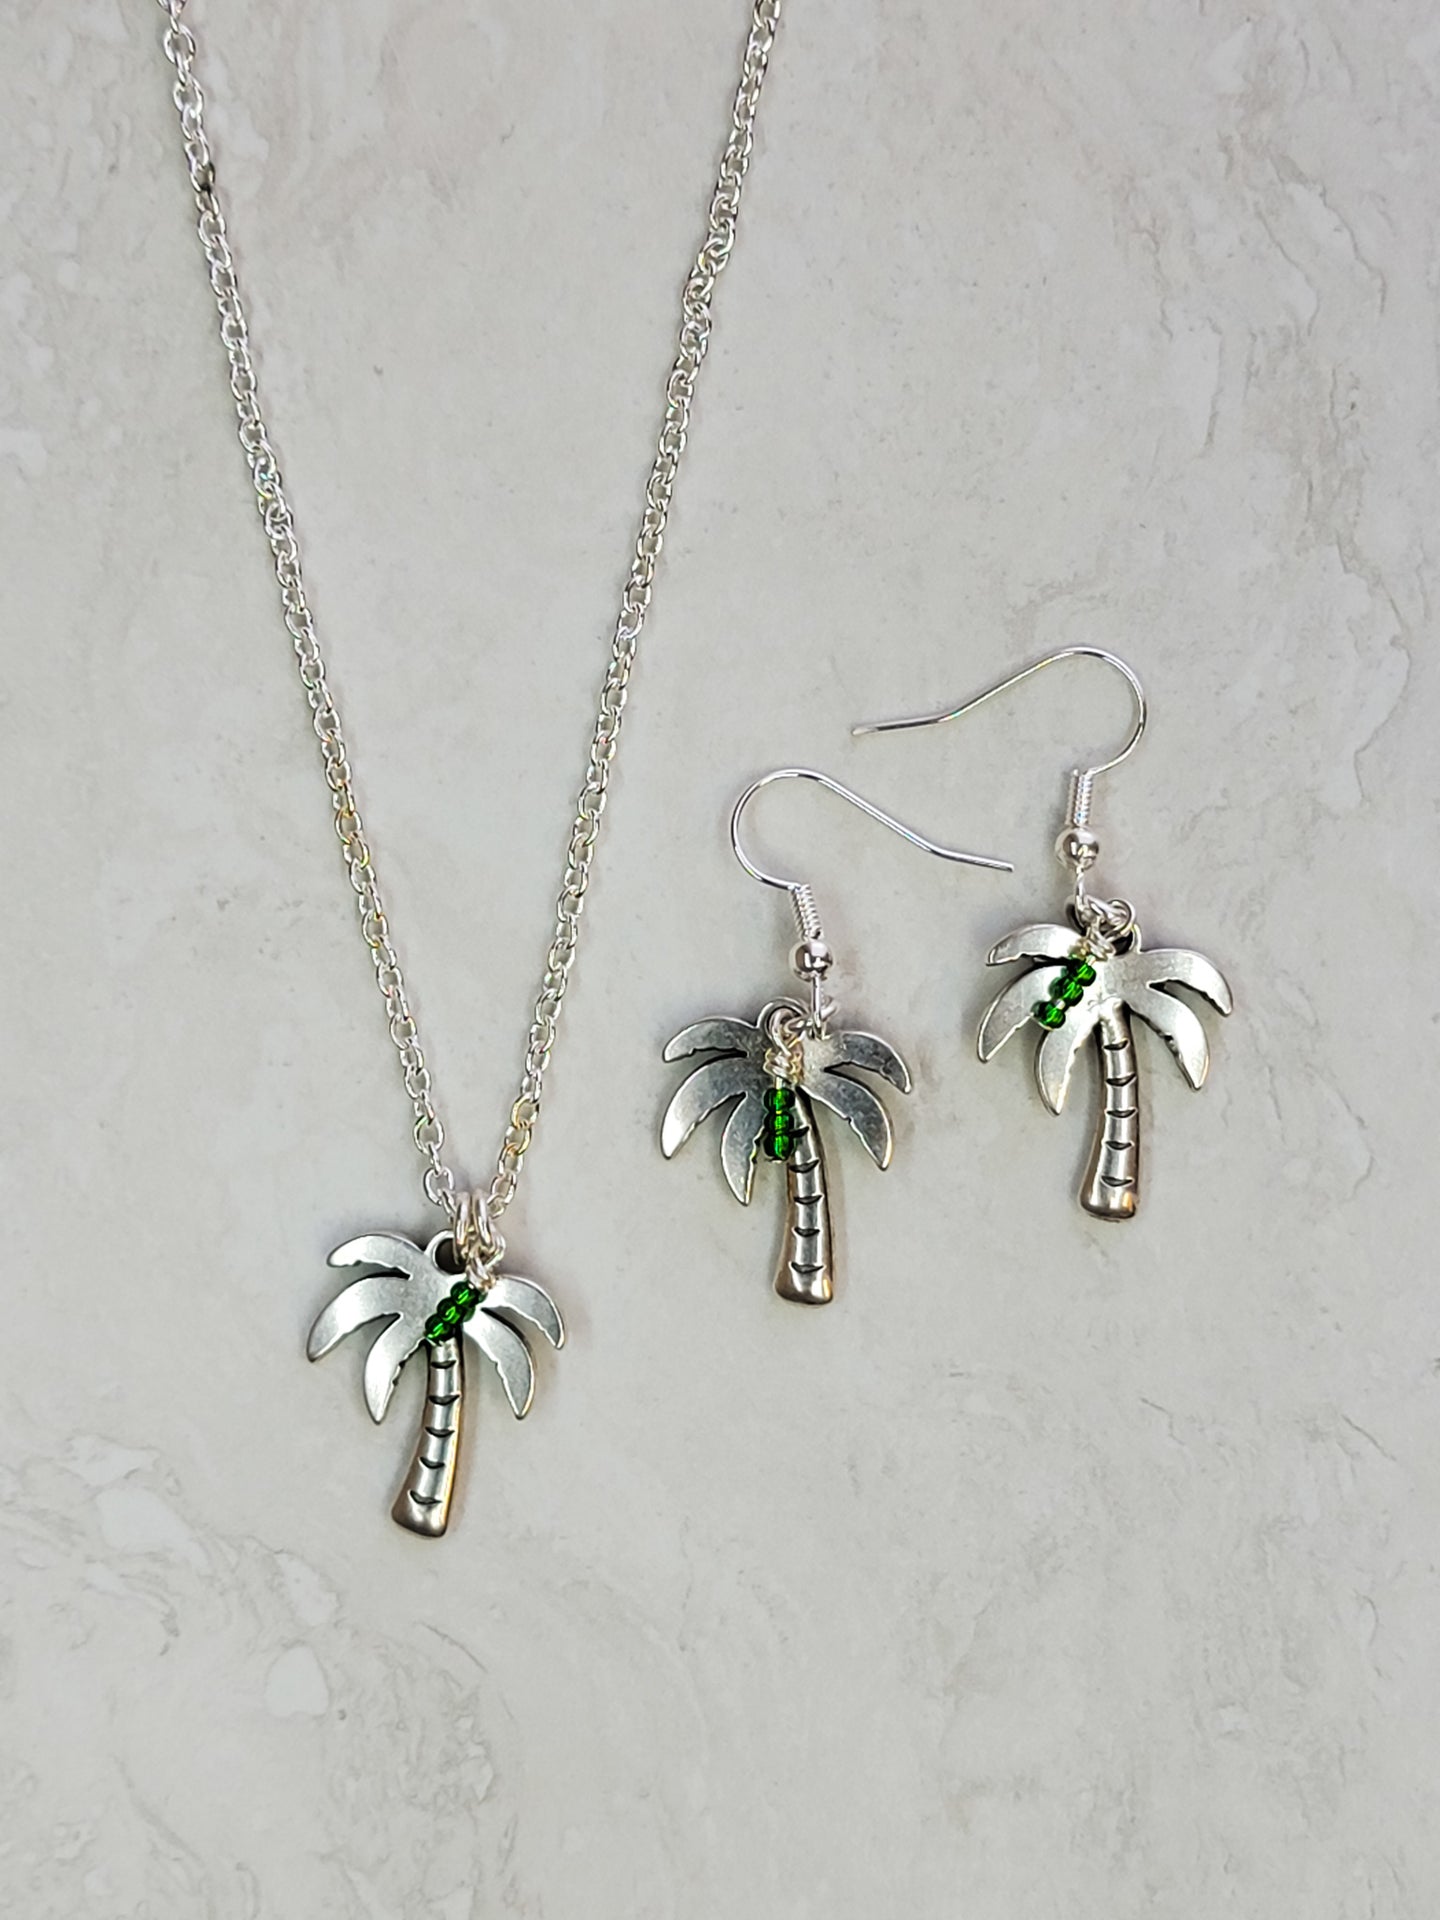 Palm Tree & Green Seed Bead Jewelry Set - Silver - Matching Necklace & Earrings - One Of A Kind